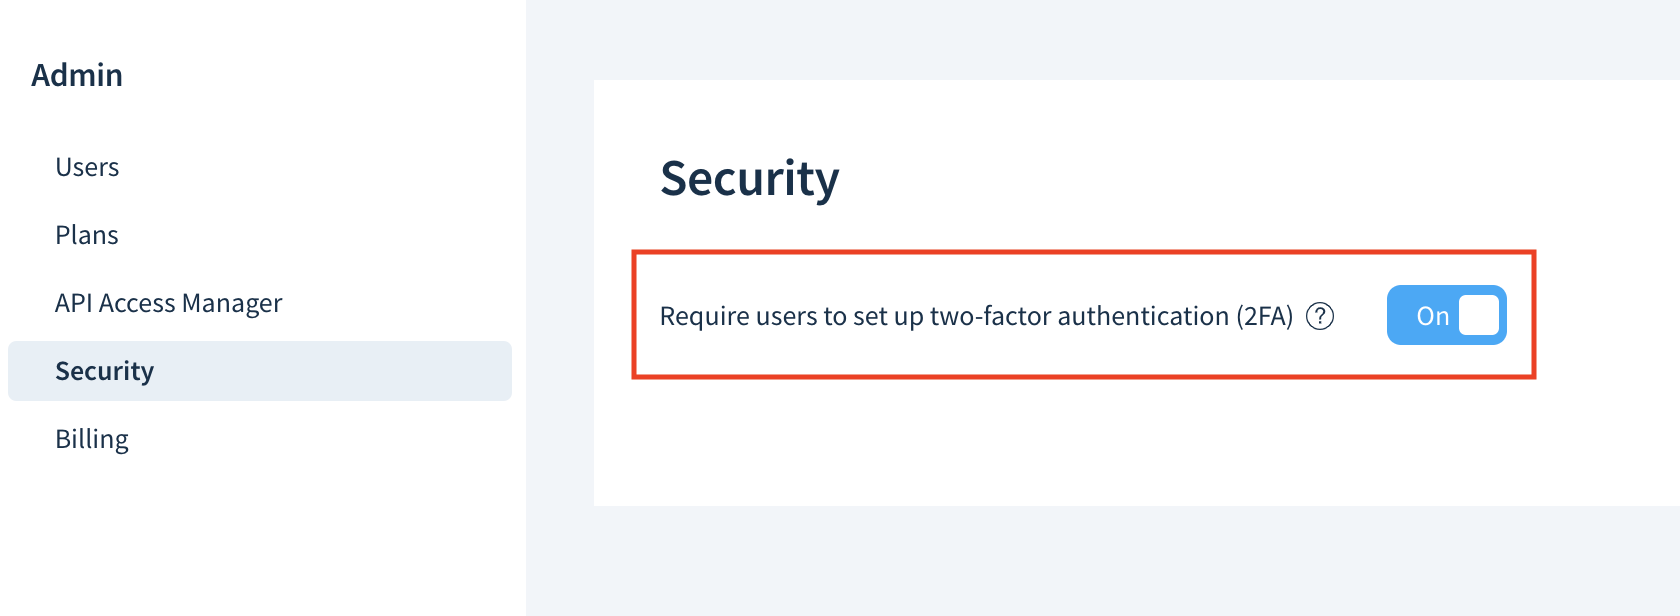 Screenshot of the Security tab of the Admin page. The Require users to set up two-factor authentication (2FA) option is set to On.